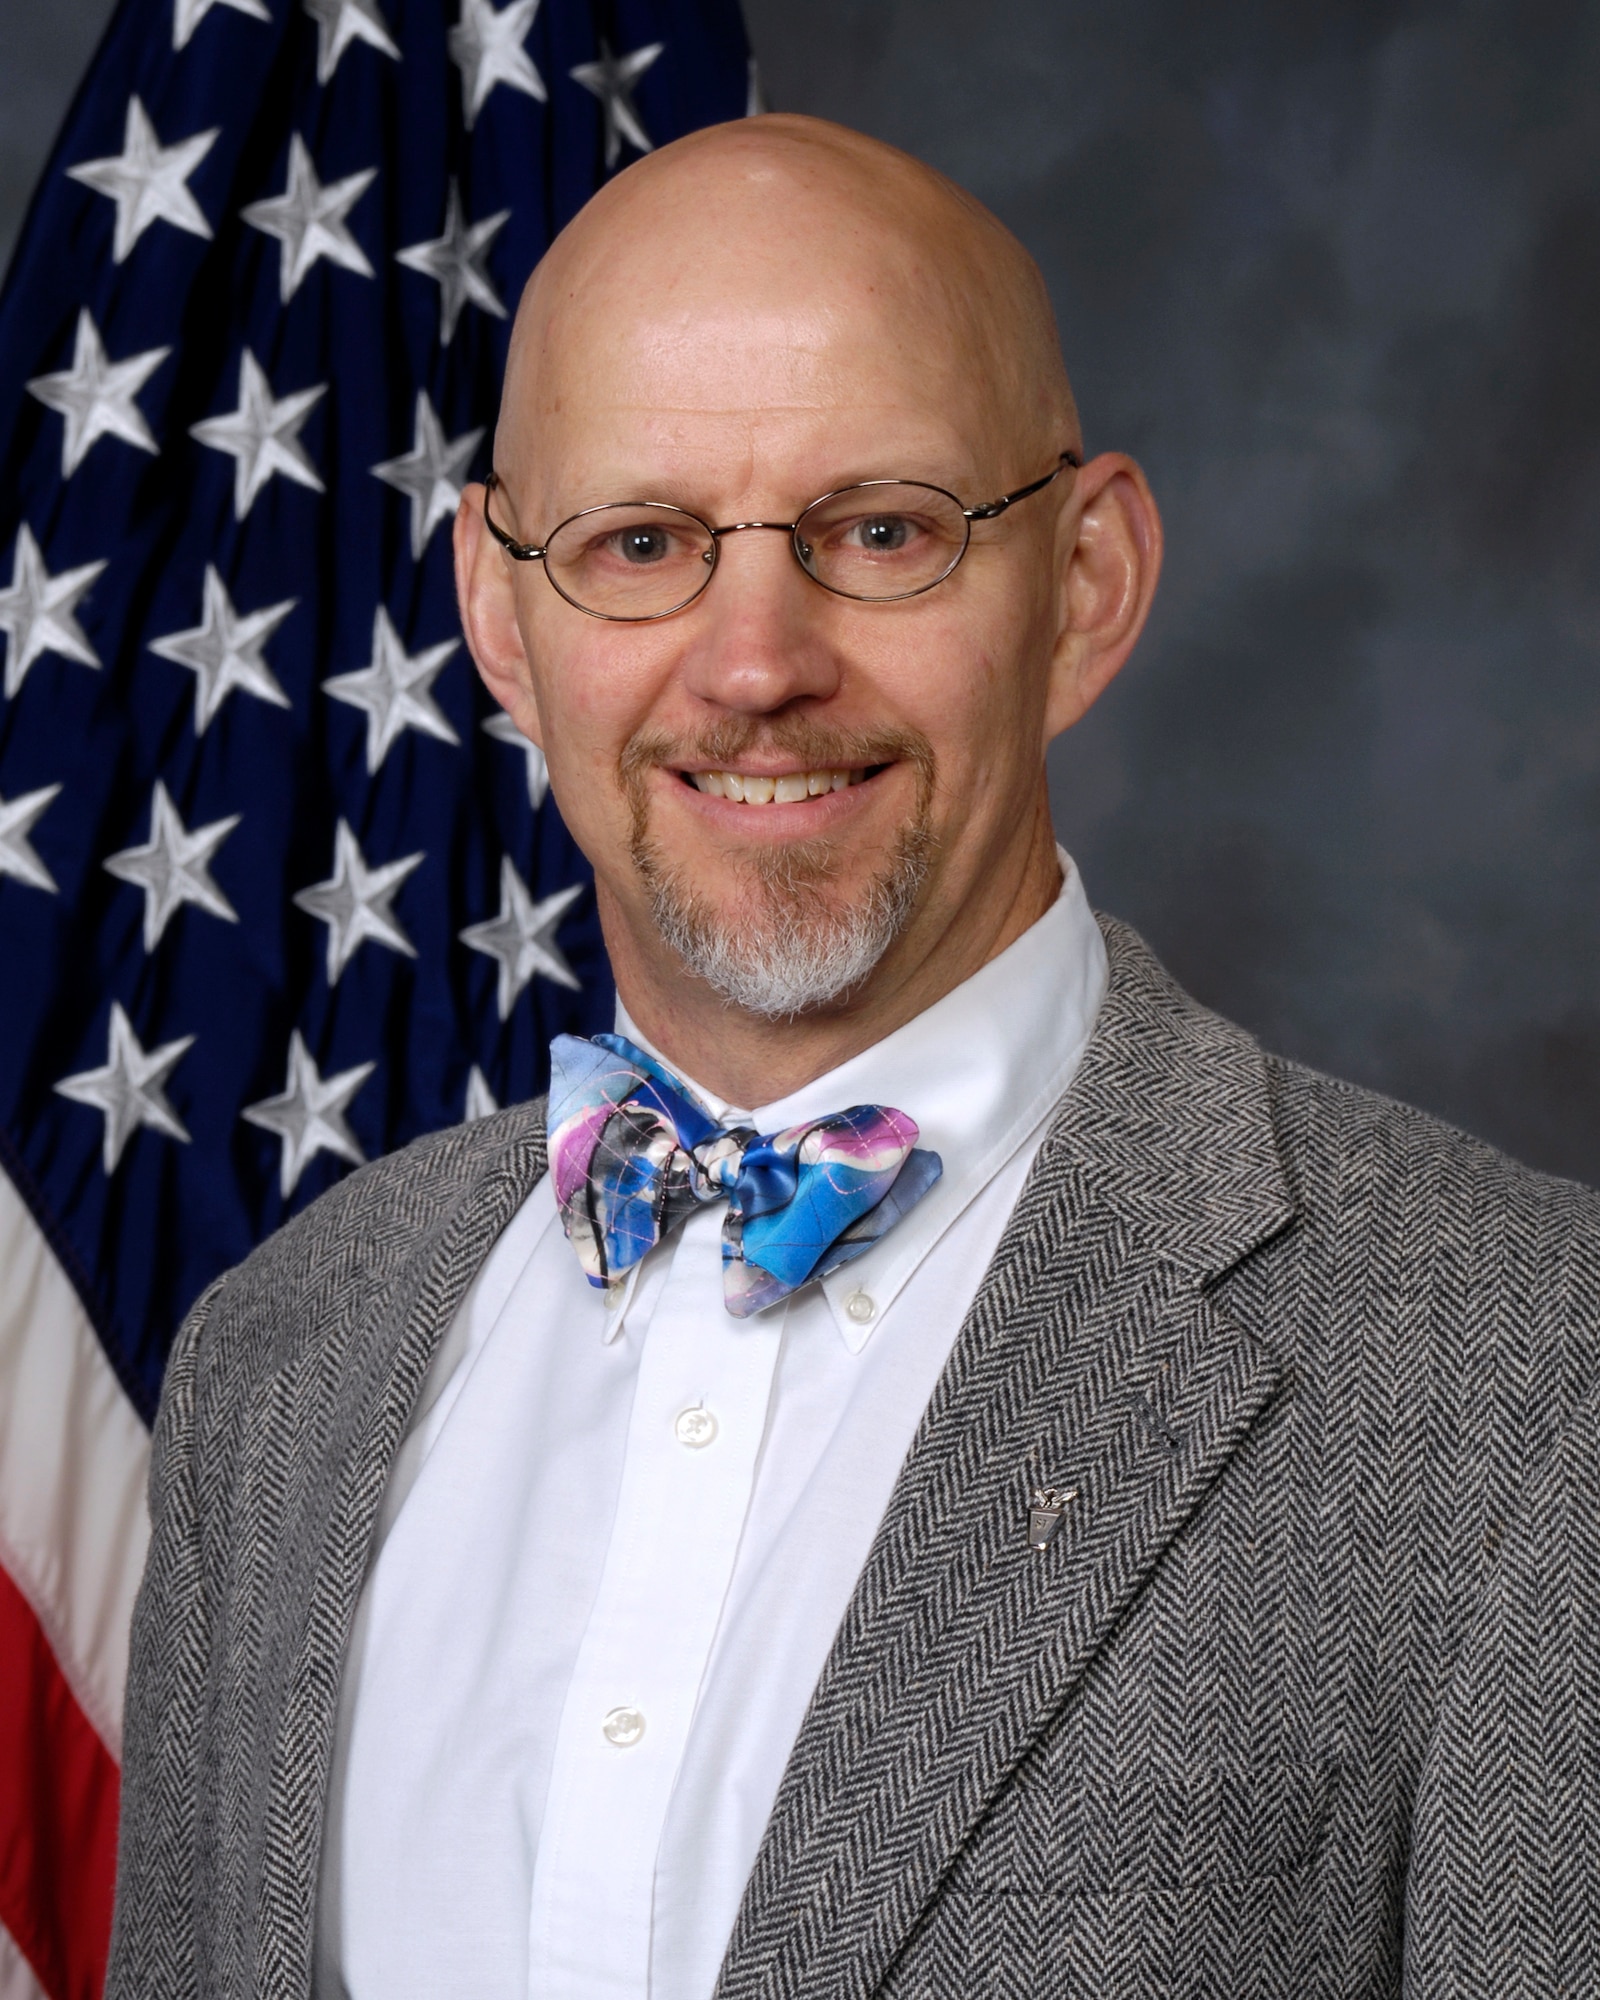 Dr. Daniel B. Miracle, Air Force Research Laboratory Materials and Manufacturing Directorate senior scientist for Nanotechnology. (Official U.S. Air Force Photo)